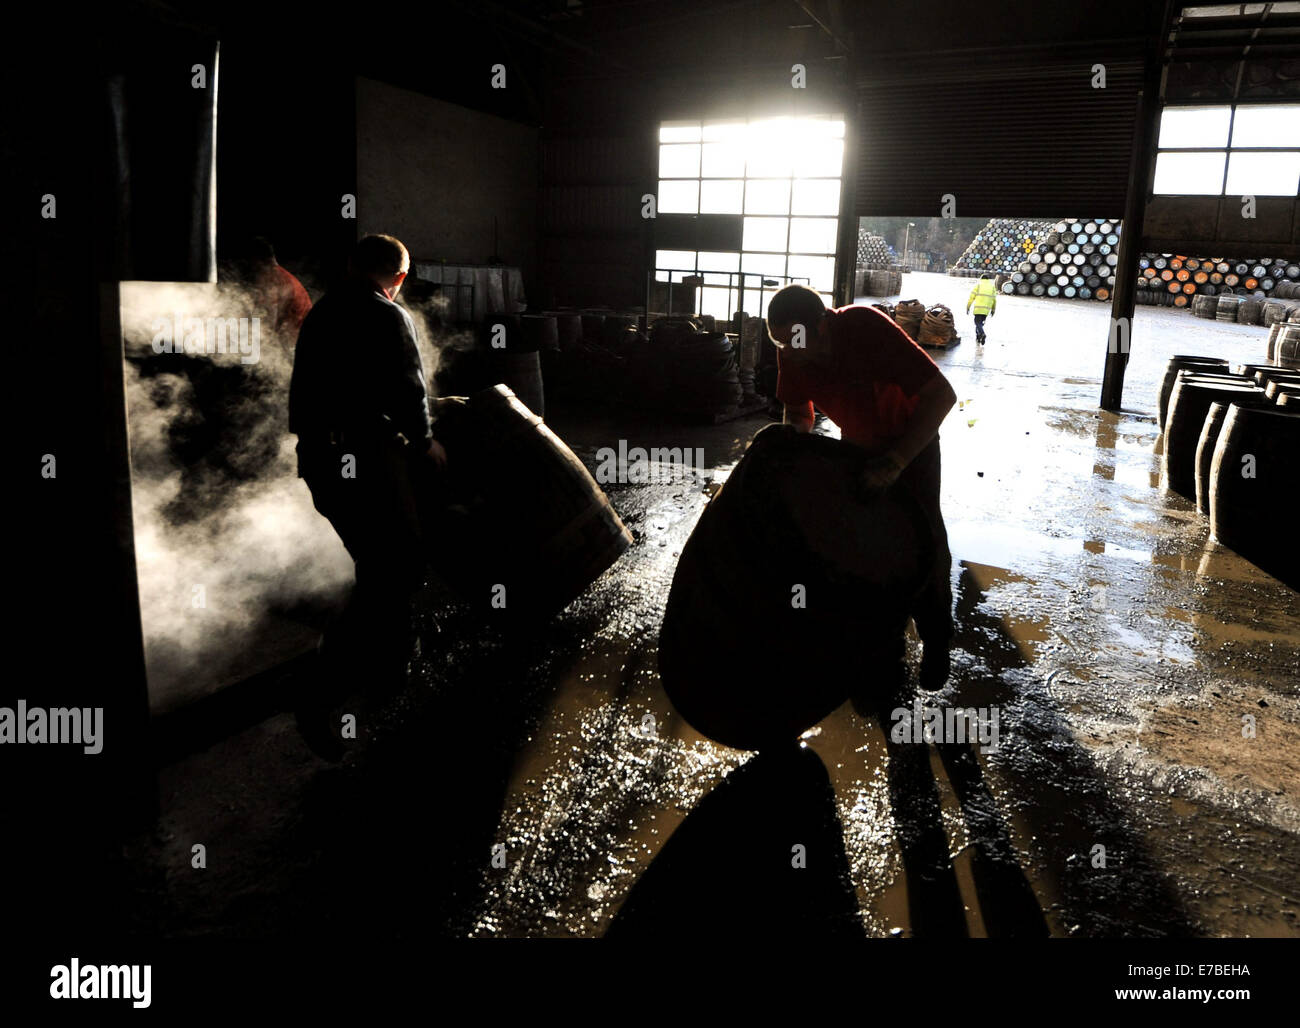 Coopers work on whisky casks at the Speyside Cooperage in Craigellachie, Scotland. Stock Photo